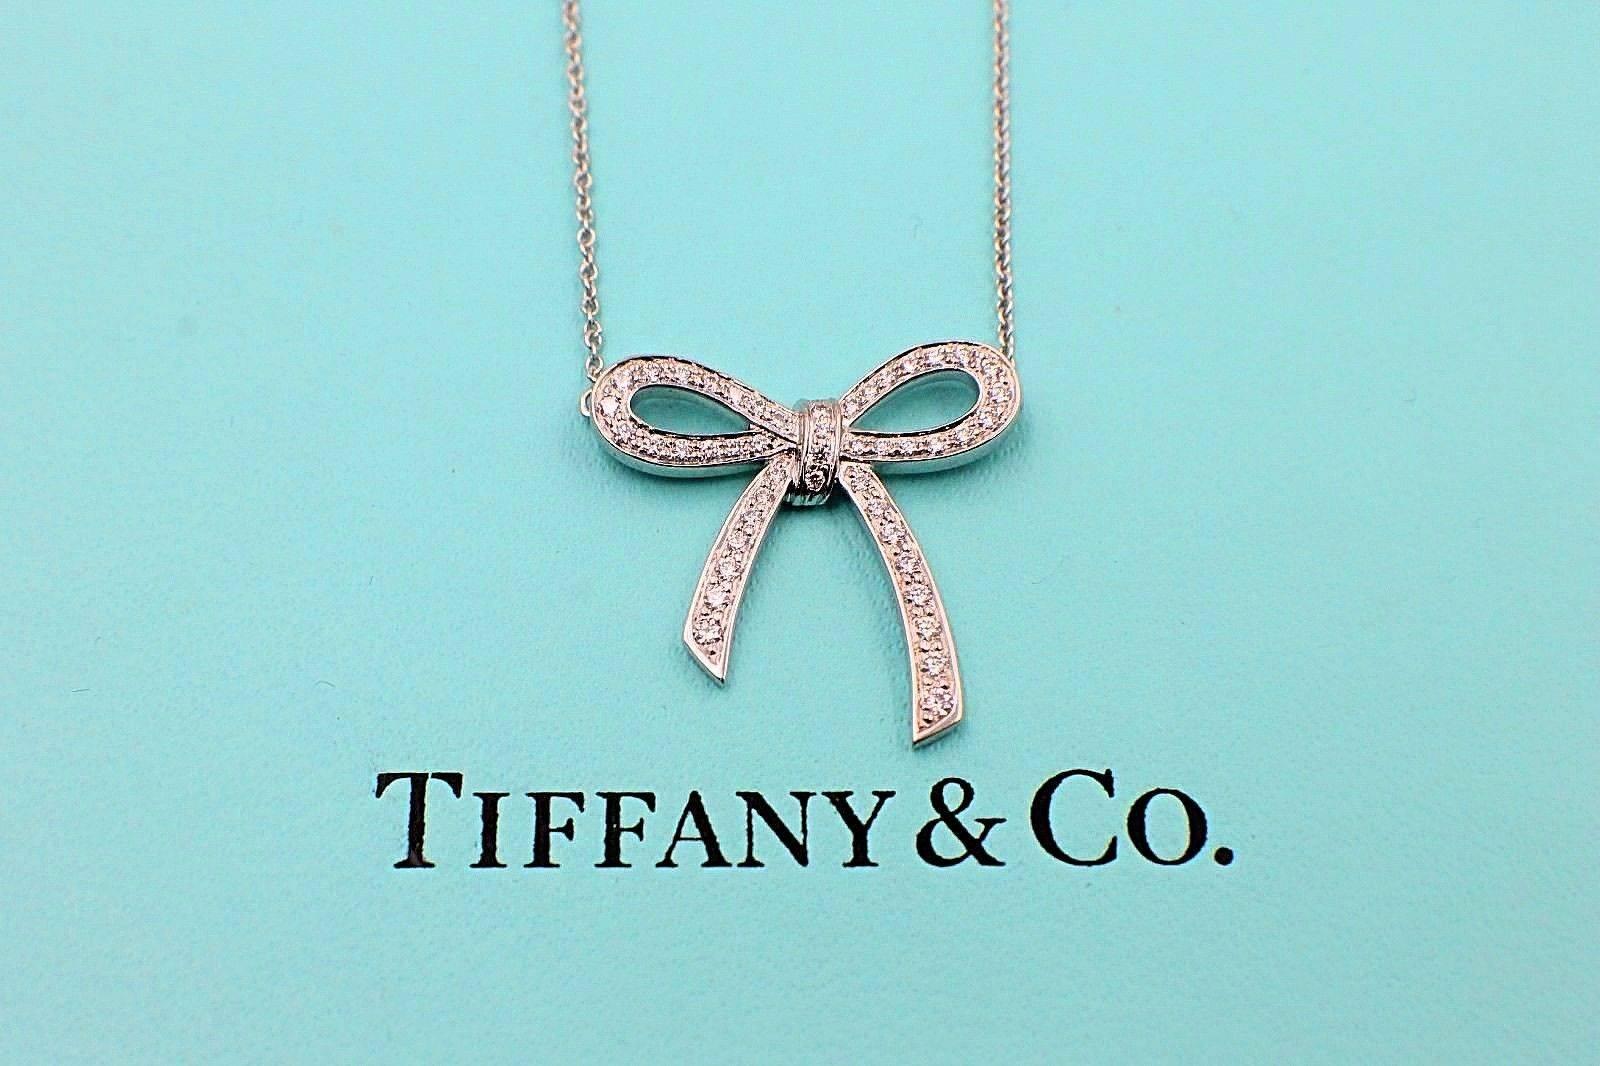 Women's or Men's Tiffany & Co. Diamond and Platinum Bow Pendant Necklace